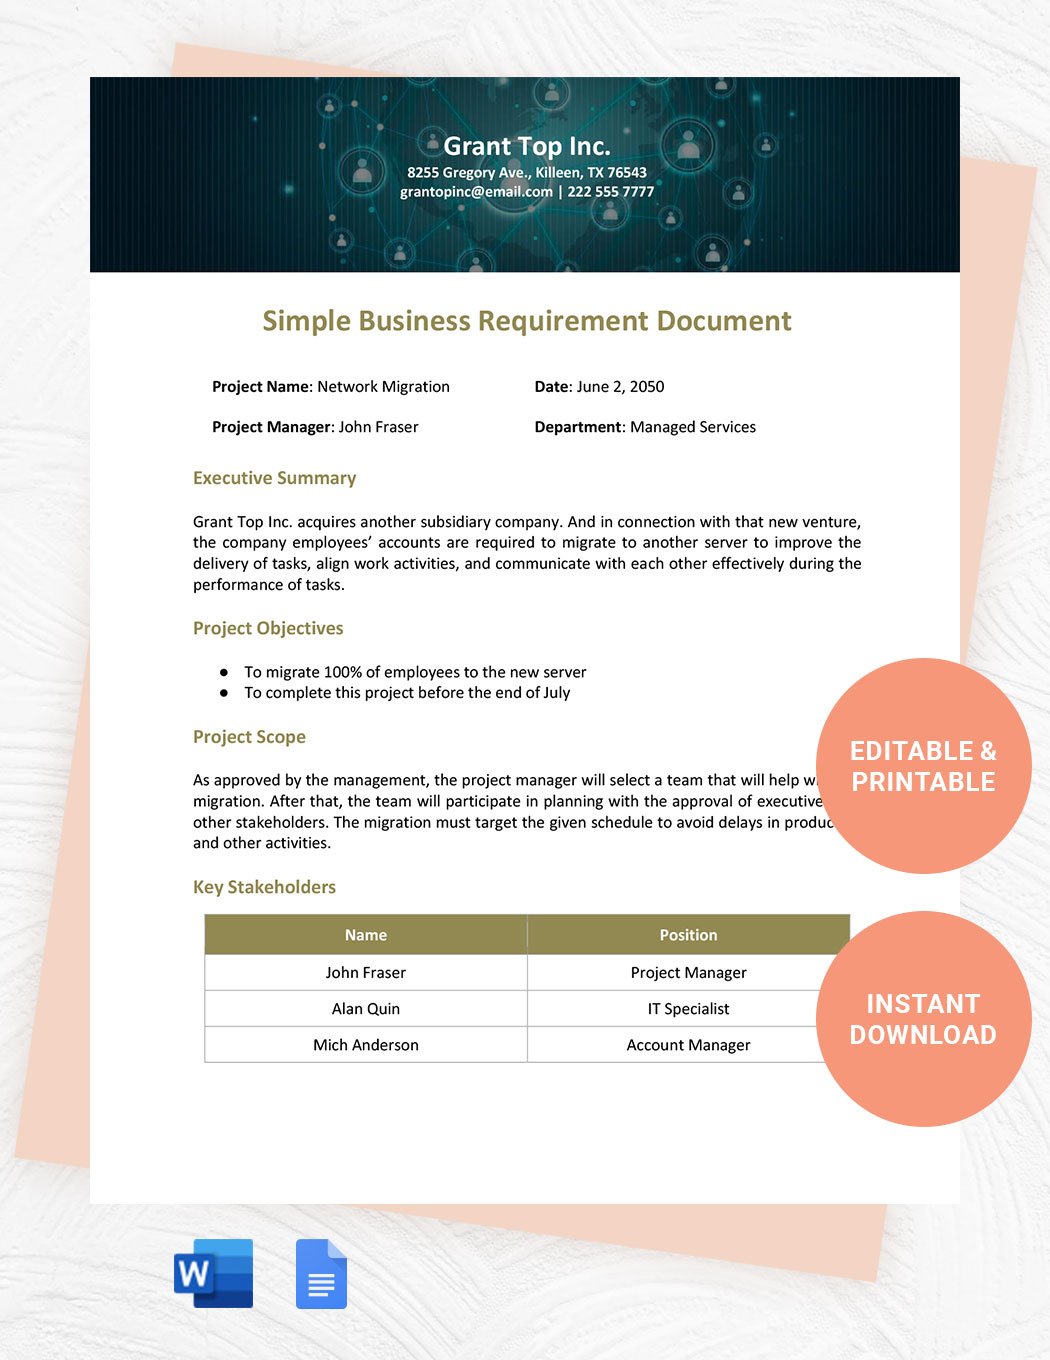 Free Simple Business Requirements Document Template in Word, Google Docs